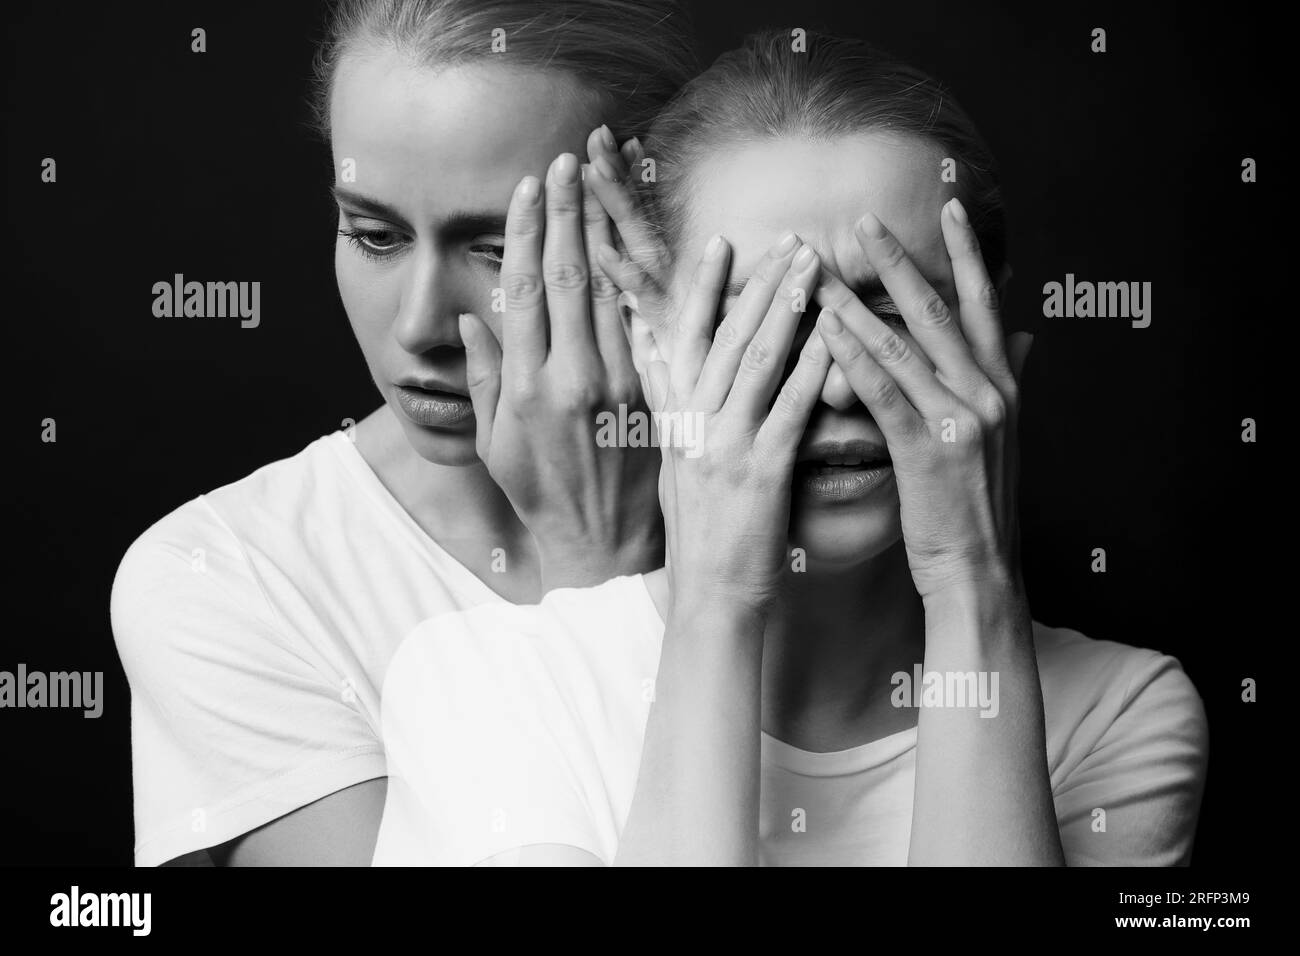 Suffering from hallucinations. Double exposure with photos of woman on dark background, black and white effect Stock Photo